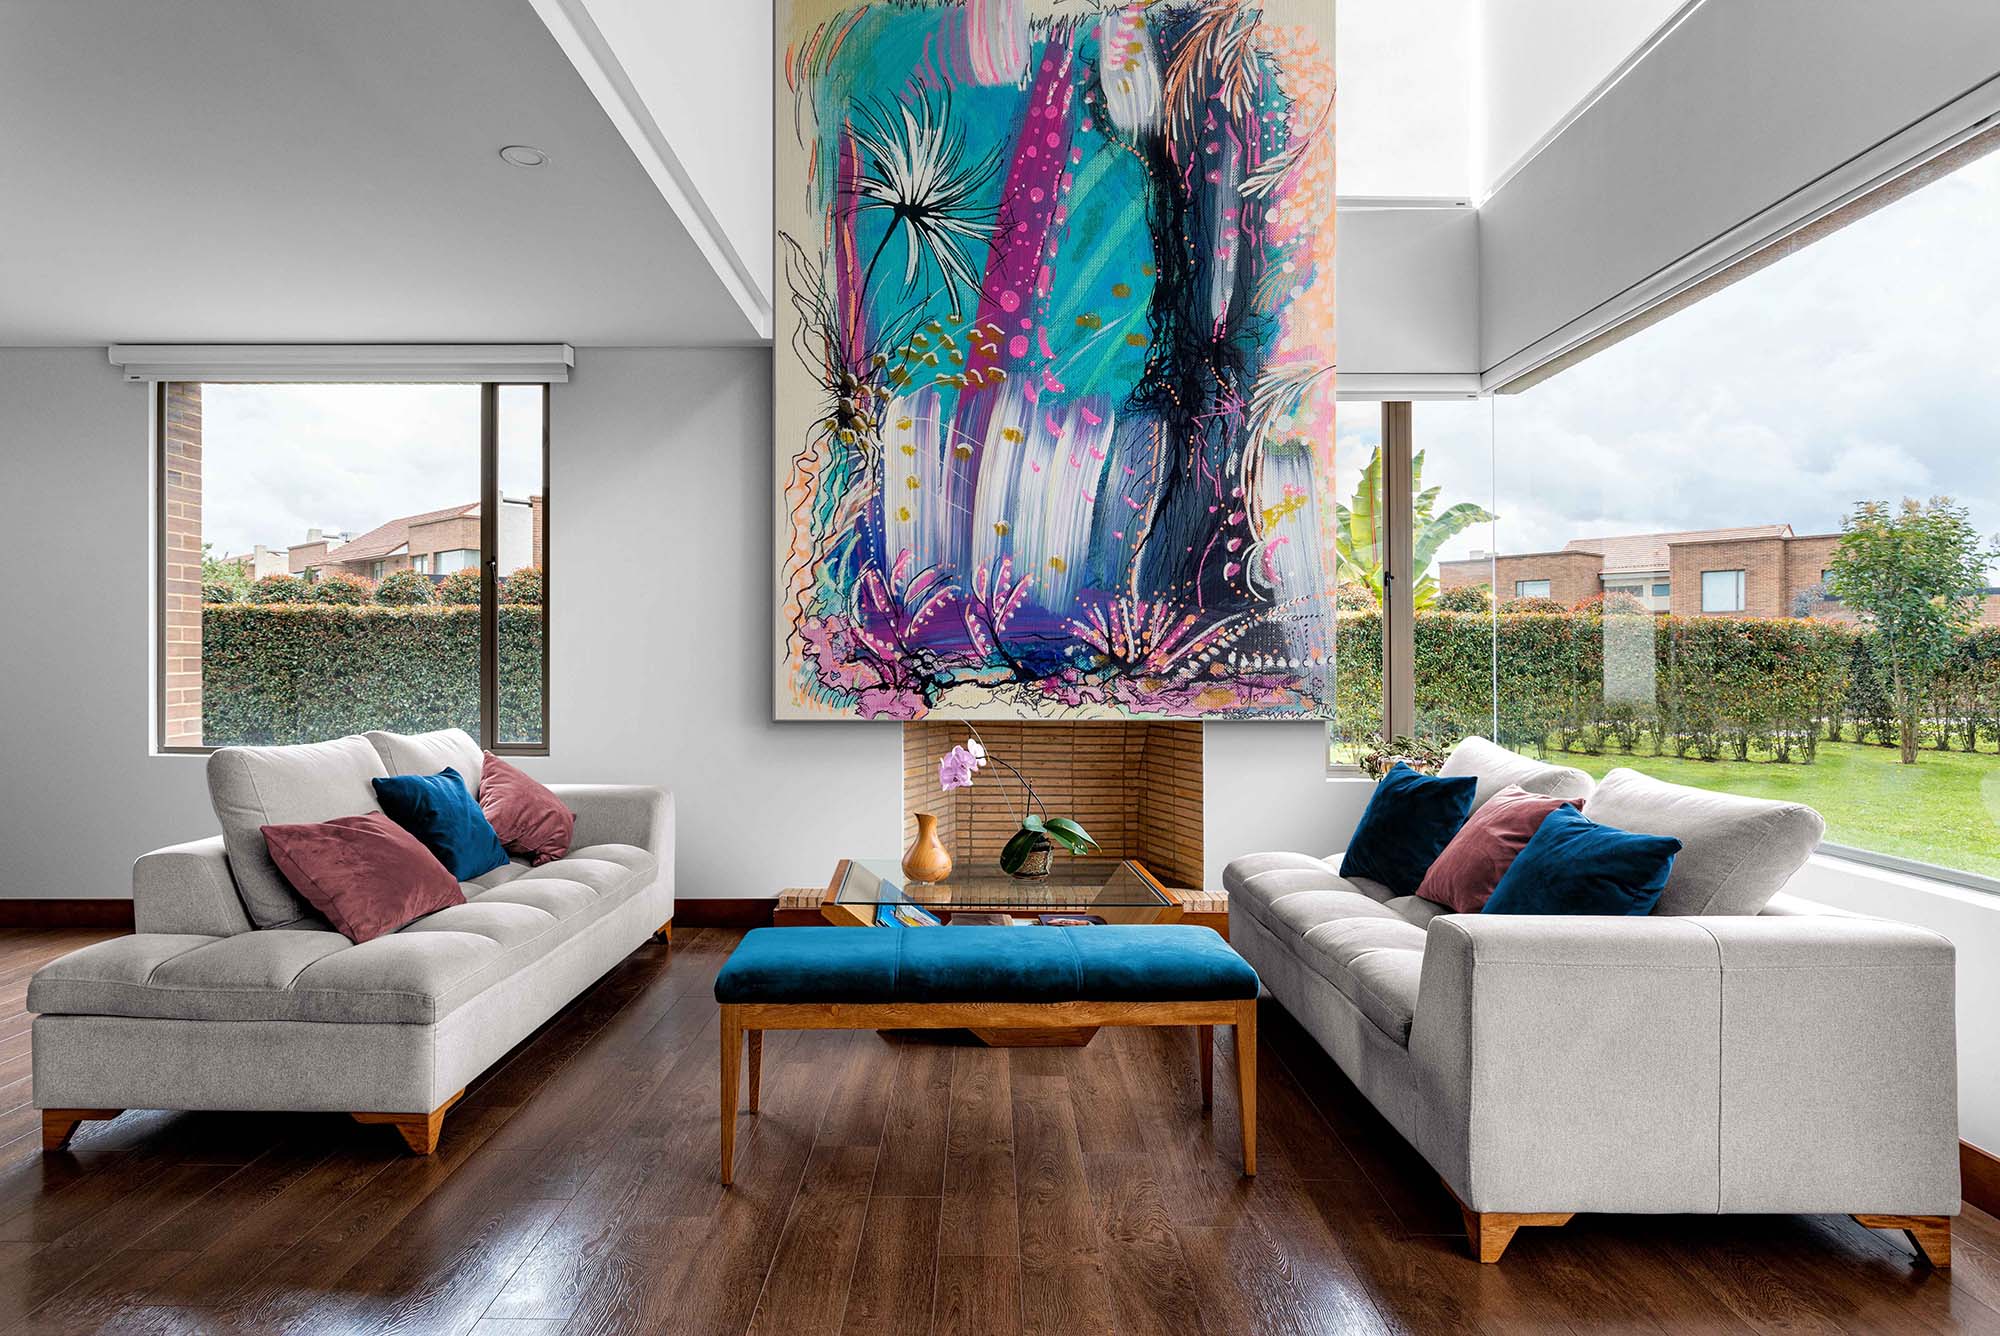 Happy Artwork Will Help Your Mood! Here Are A Few Tips To Brighten Your Home!